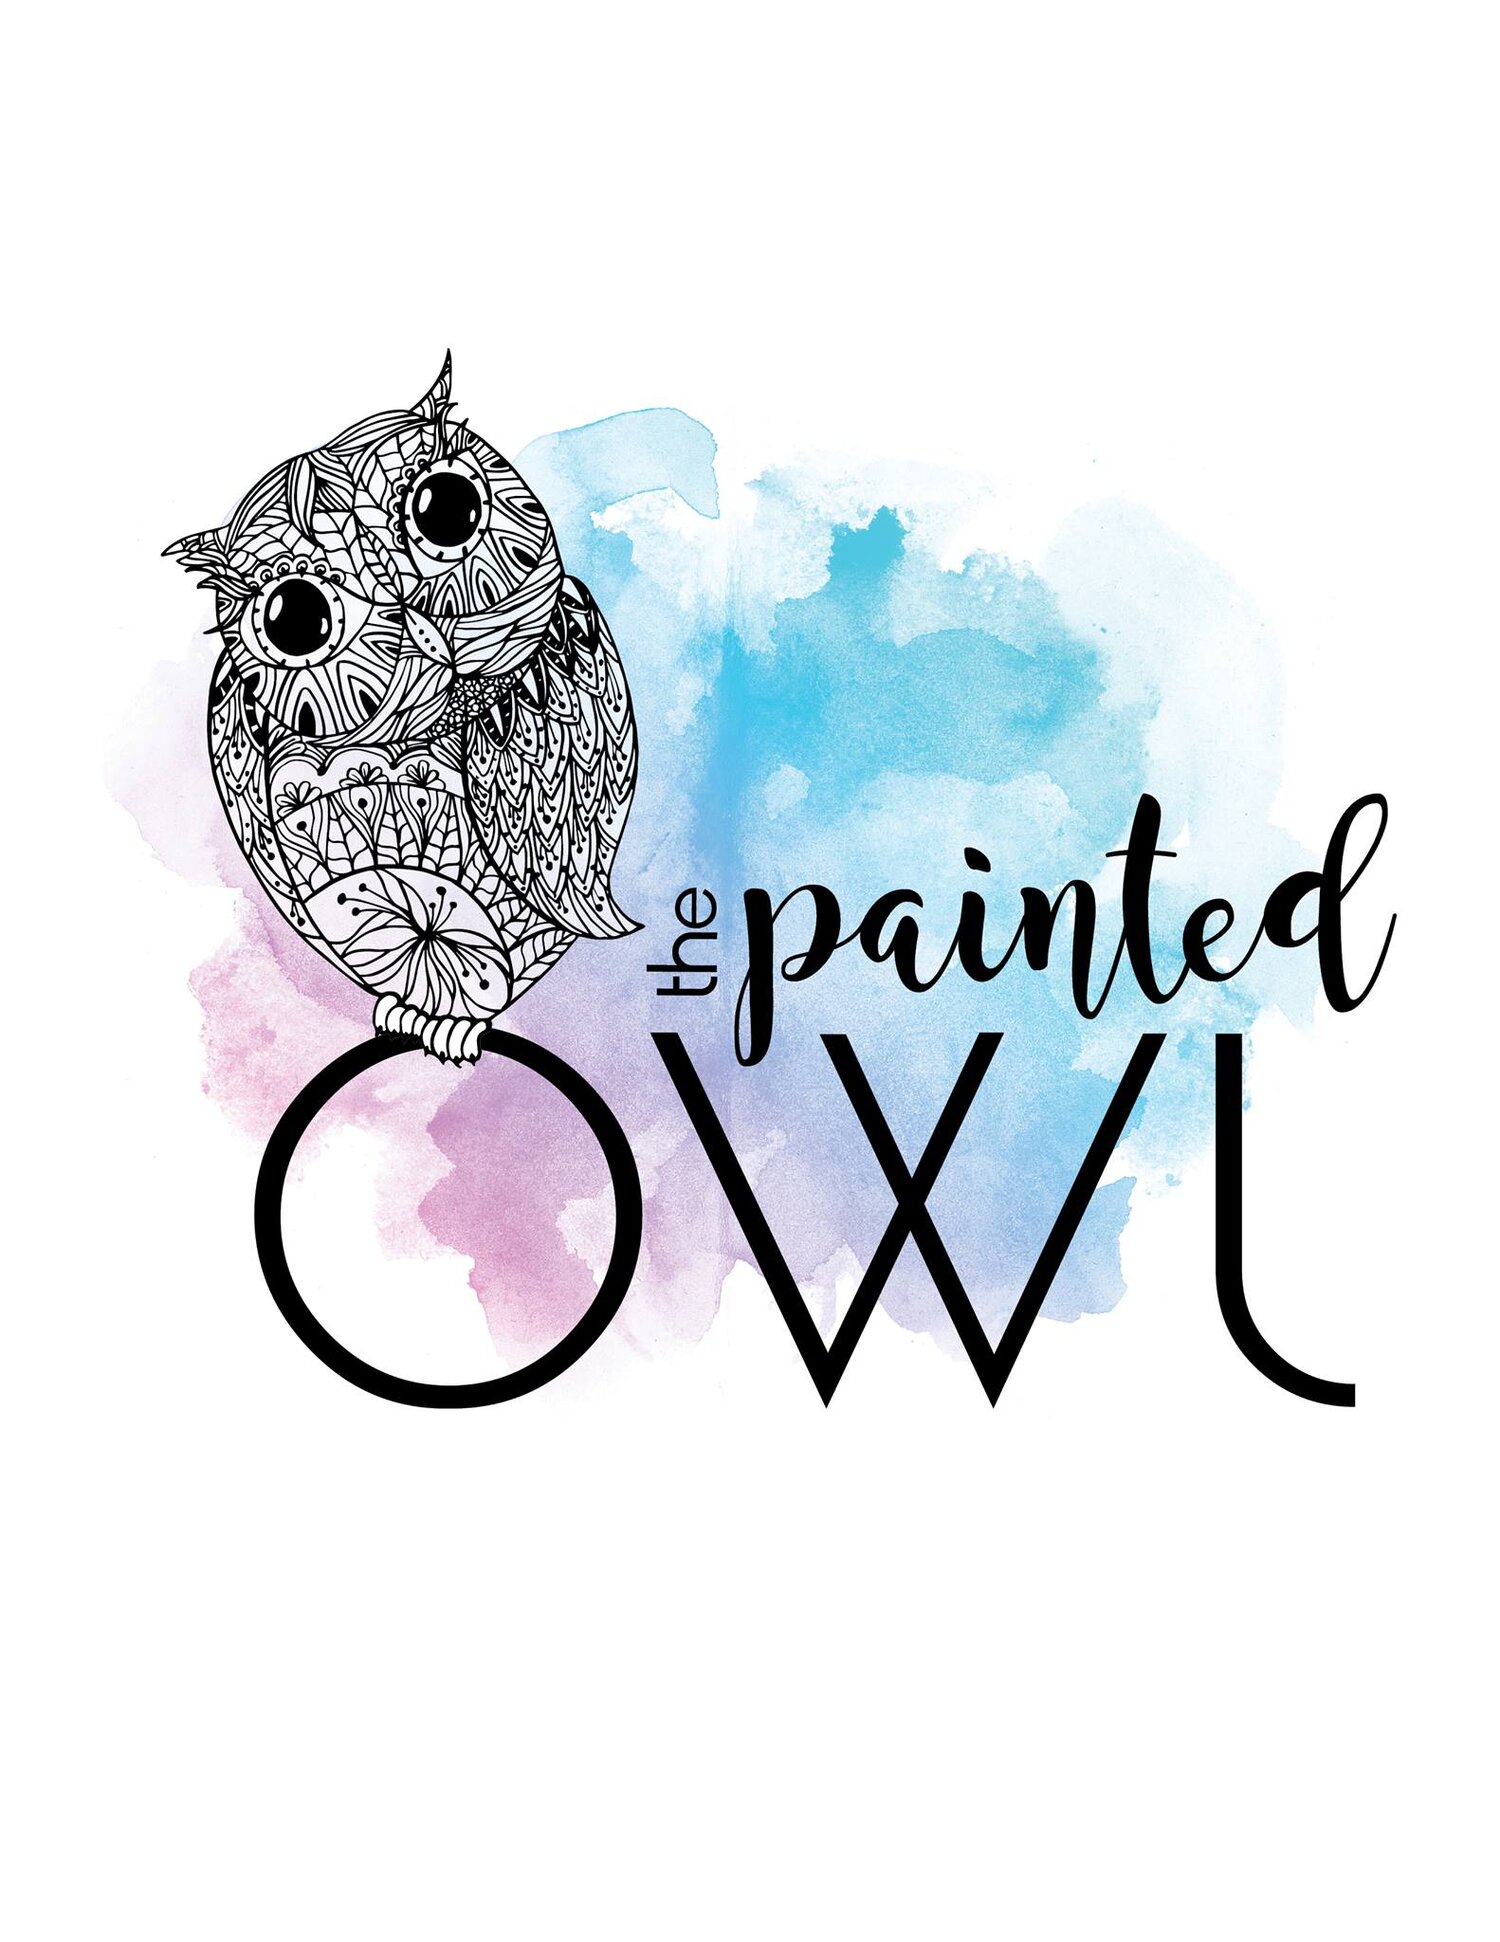 The Painted Owl